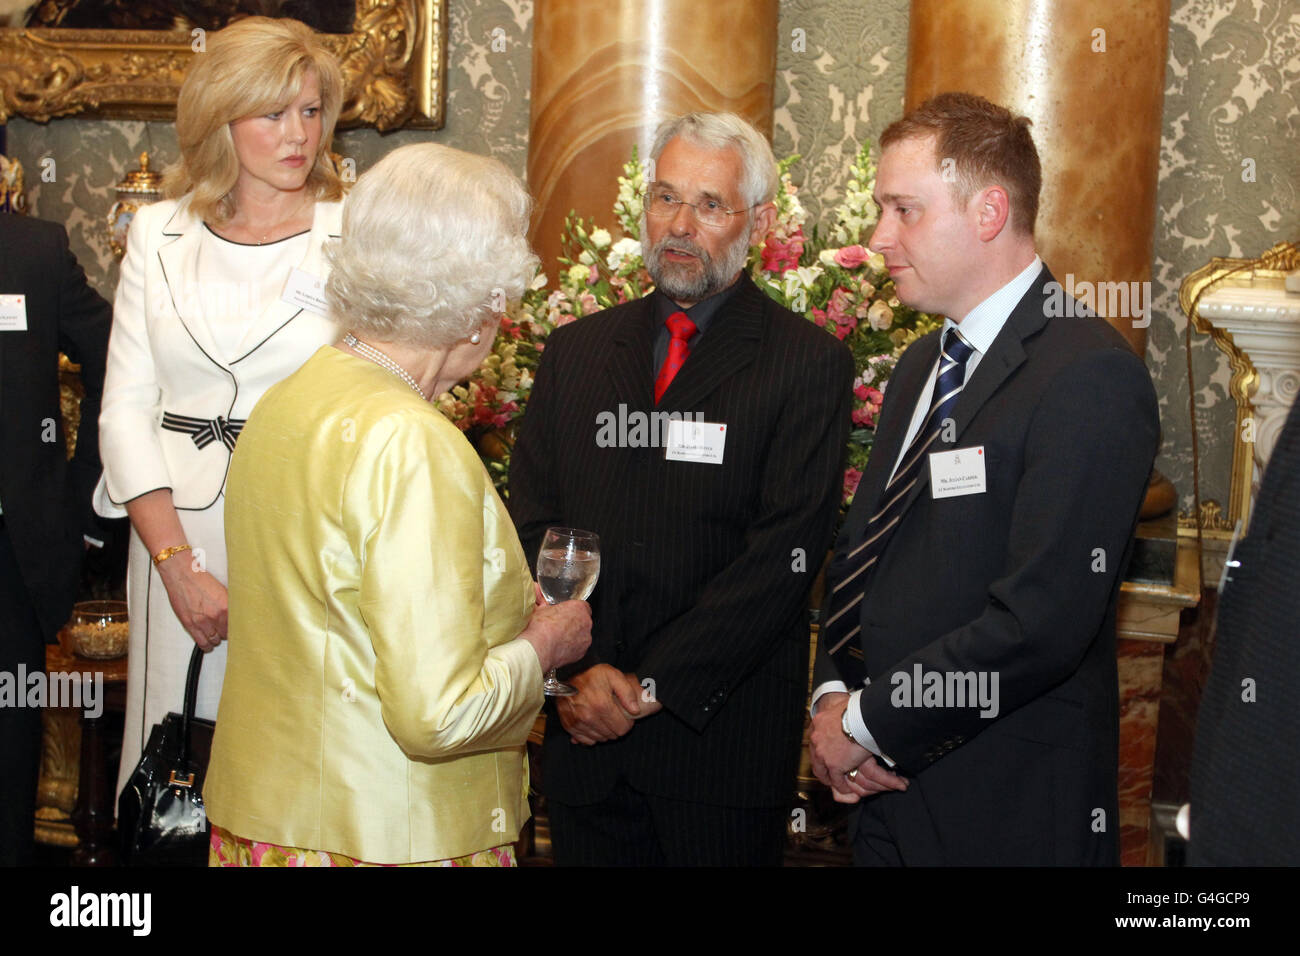 Britain's Queen Elizabeth II meets David Hoyle and Julian Carder (right) of J C Bamford Excavators at a reception for winners of the Queen's Award for Enterprise at Buckingham Palace in London. Stock Photo